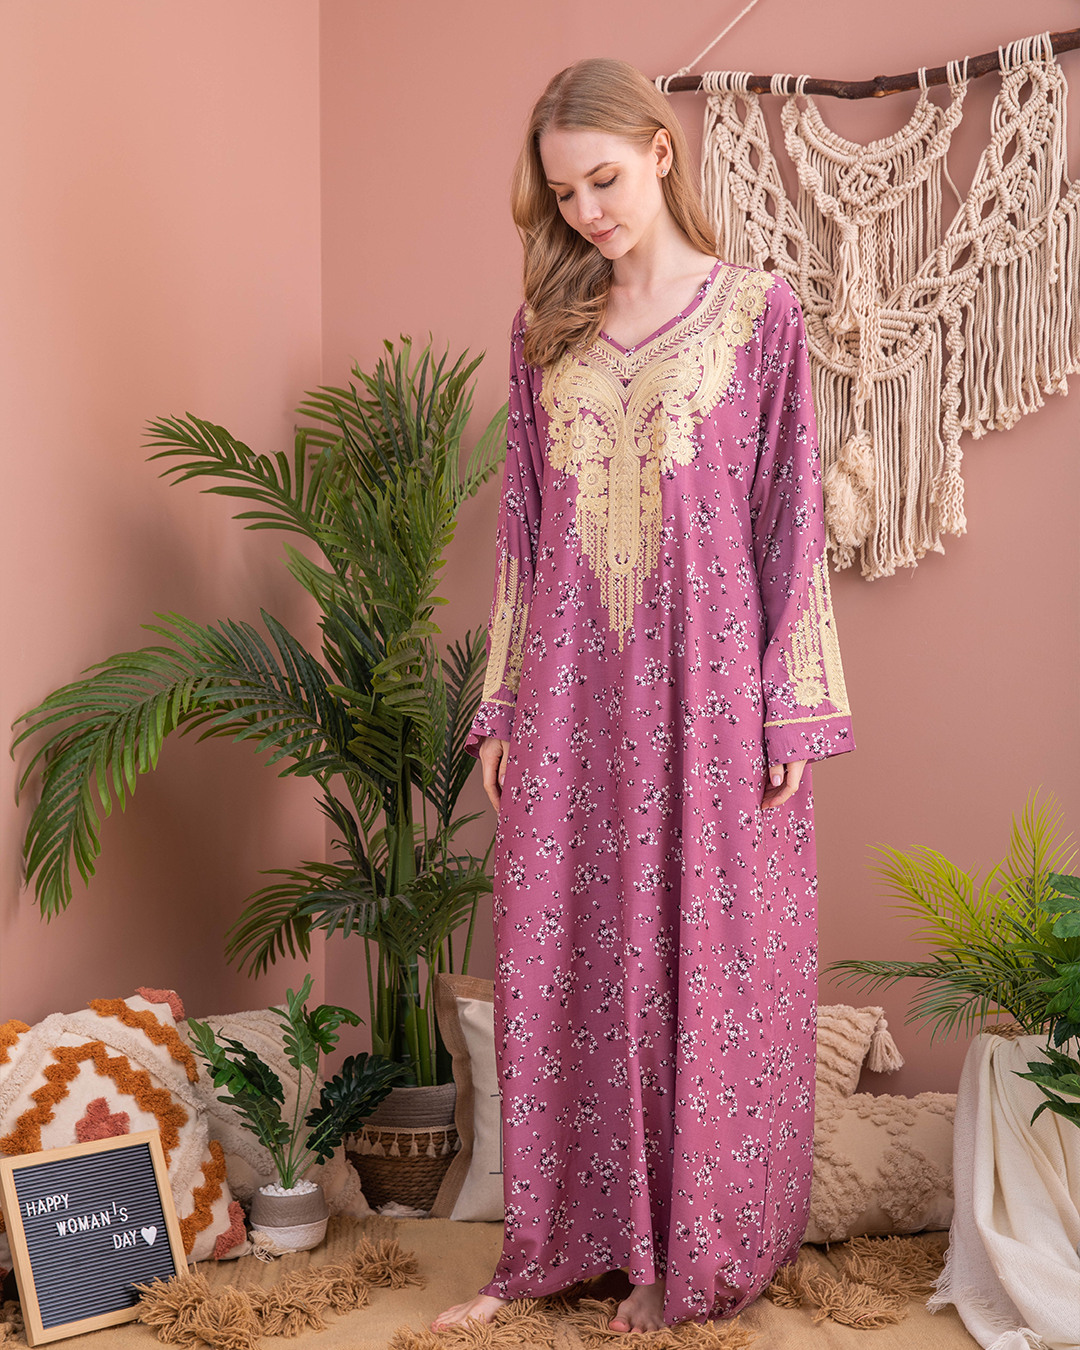 Viscose shirt with embroidered crystal sleeves